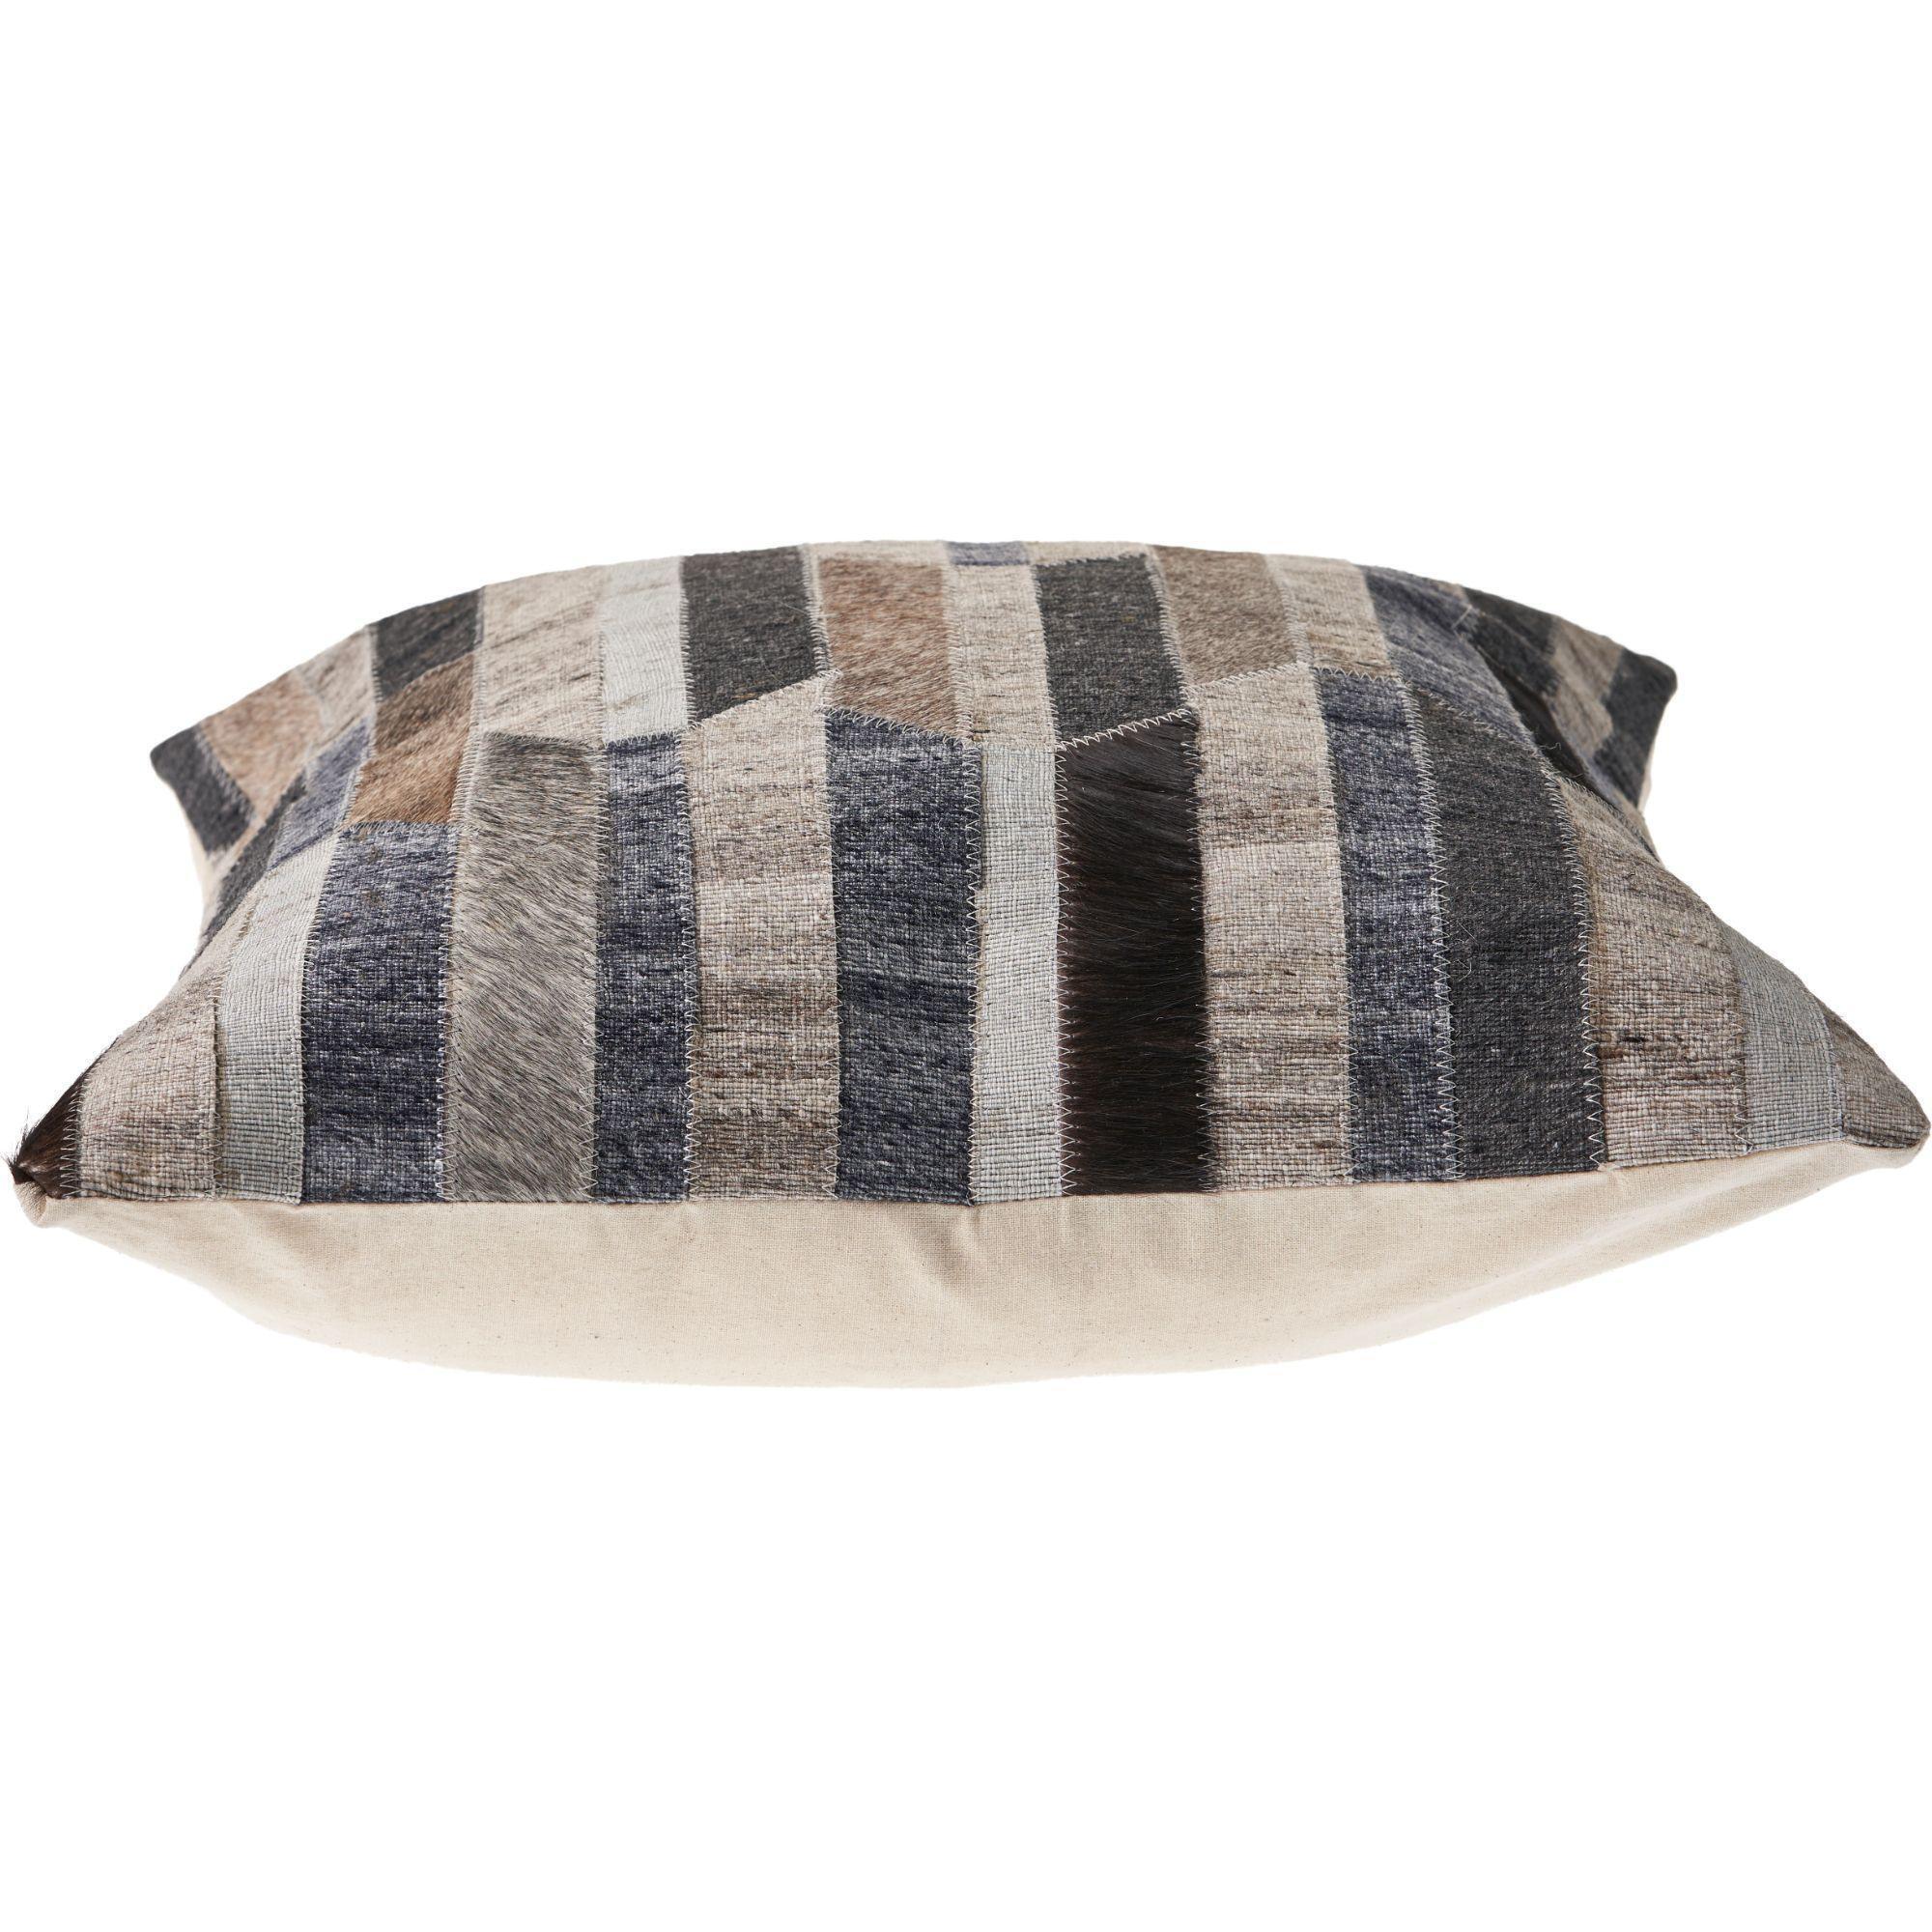 20" Gray and Black Abstract Striped Square Throw Pillow alternate image